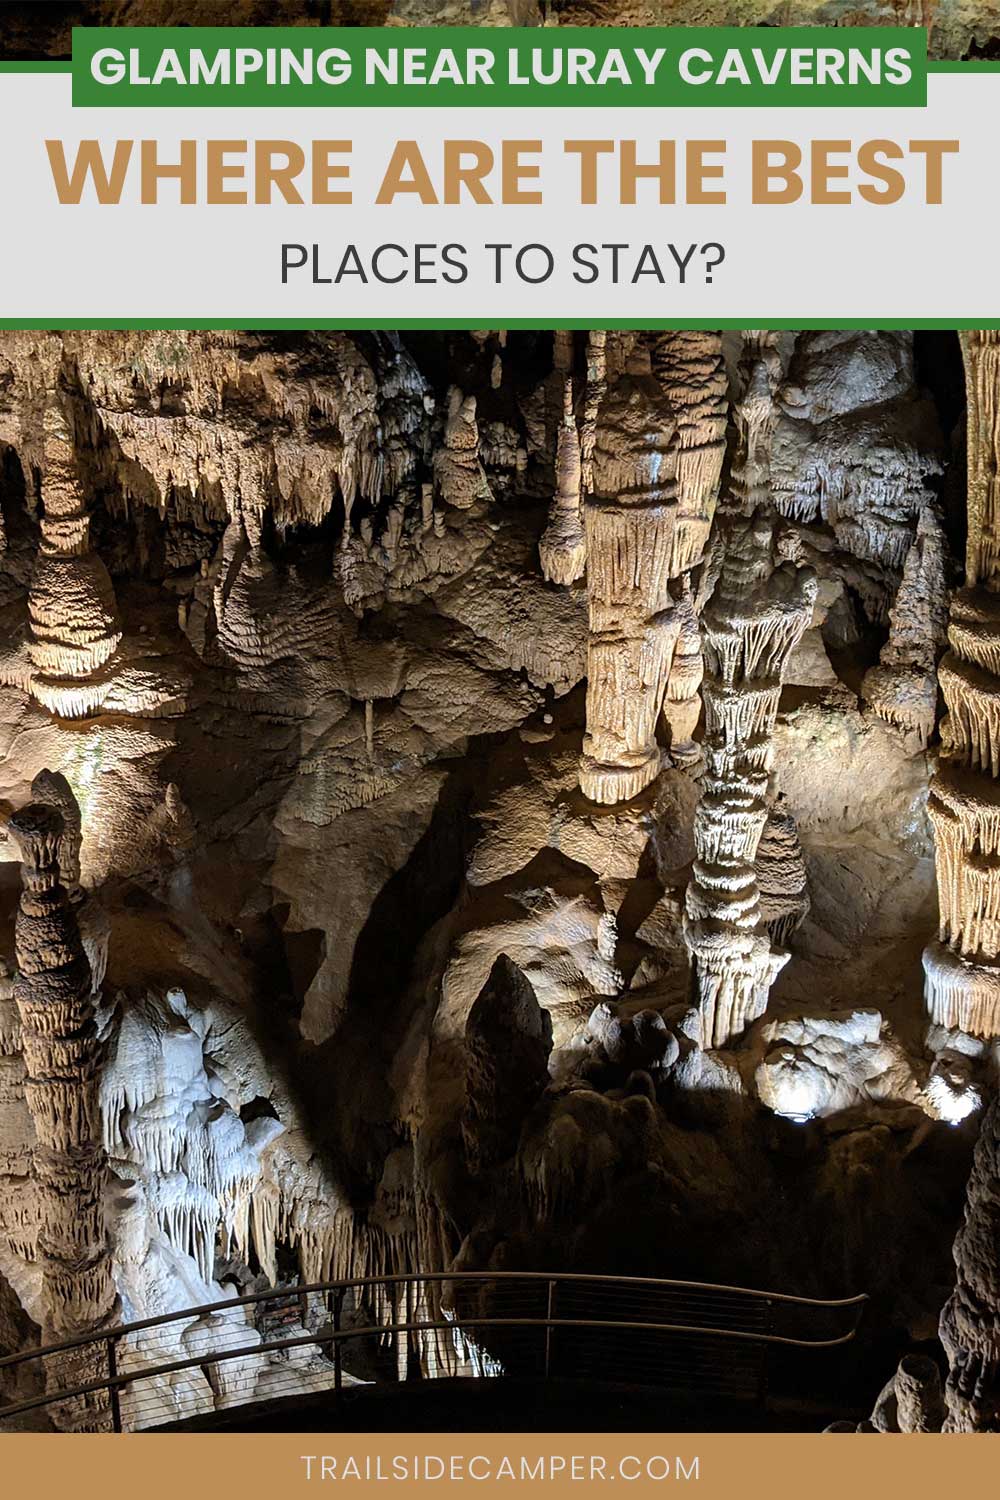 Glamping Near Luray Caverns – Where are the Best Places To Stay?